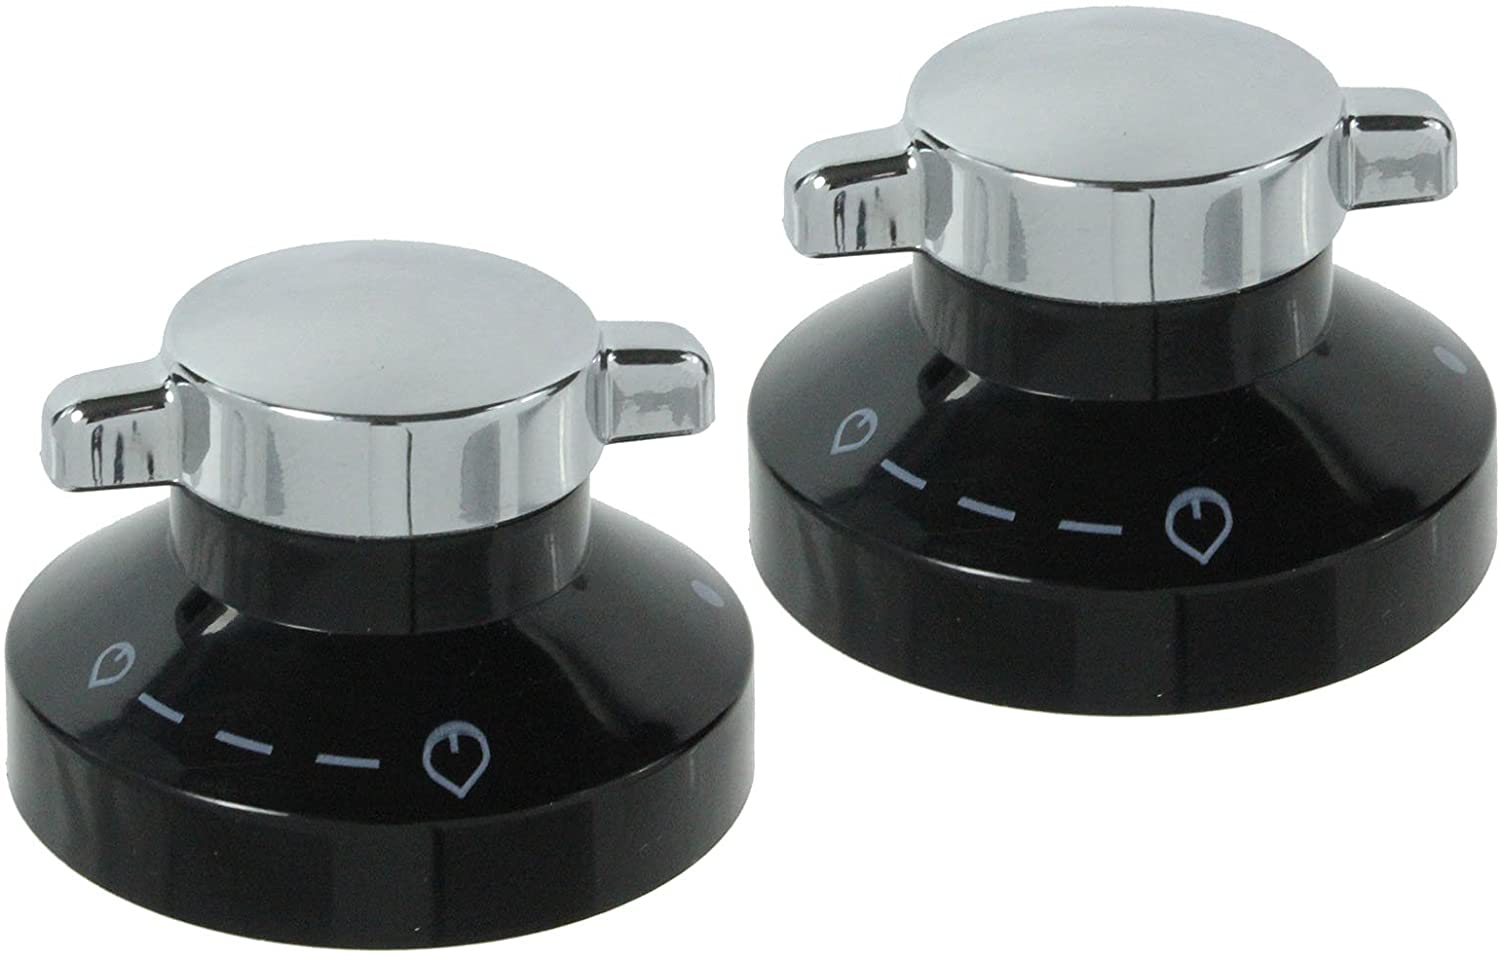 Belling New World Stoves Control Knob Dial for Cooker Hob Black / Silver, Pack of 2 x Knobs 081880326